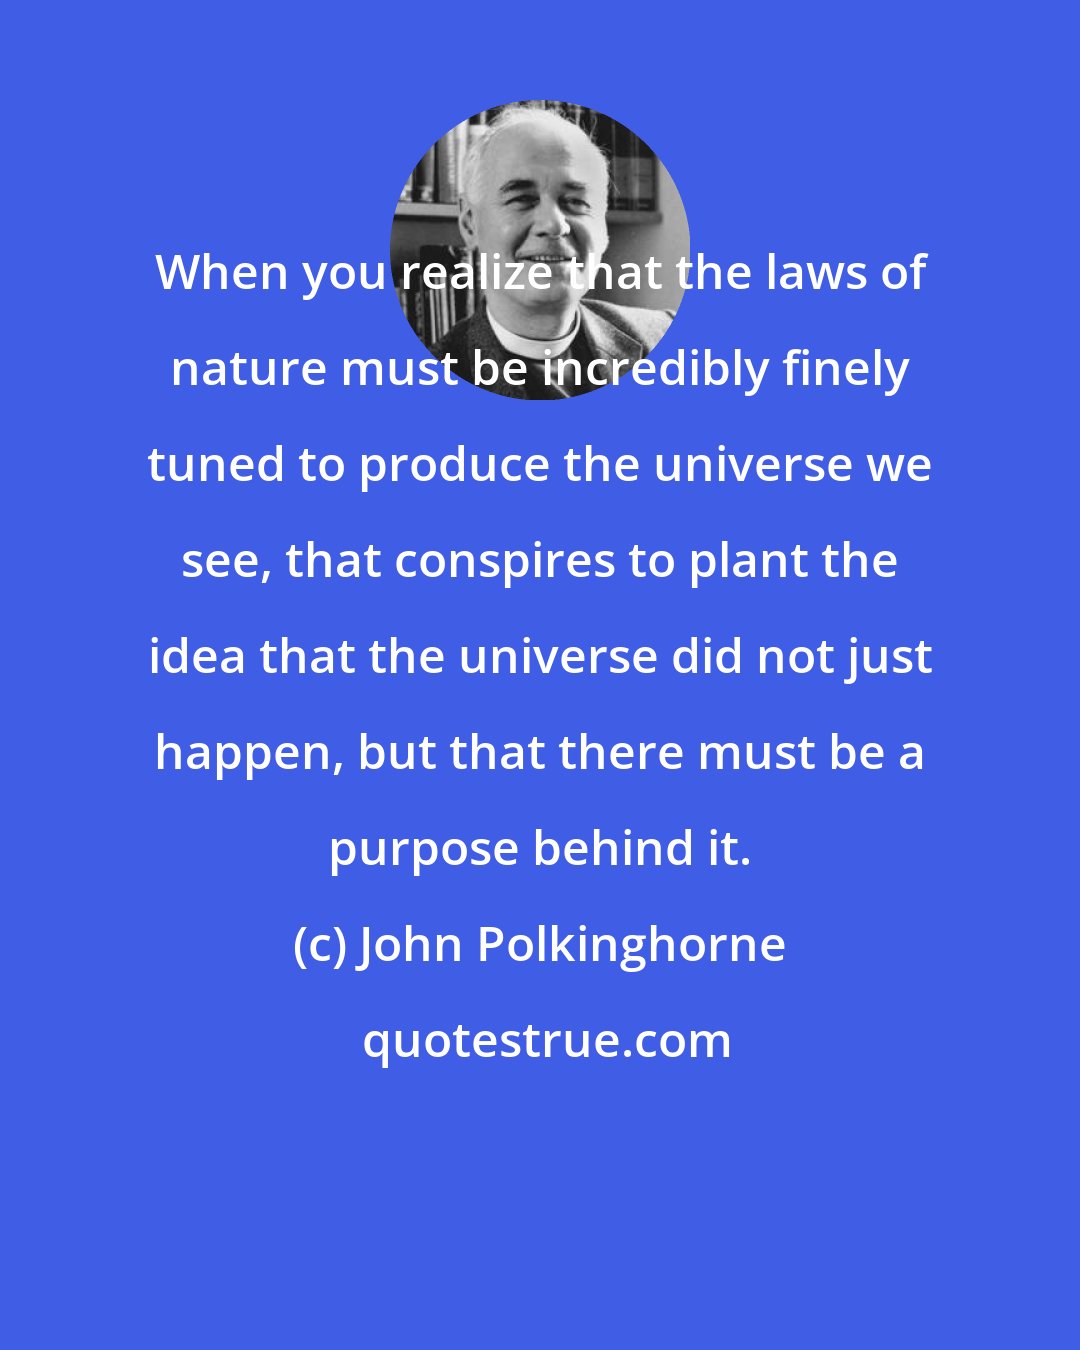 John Polkinghorne: When you realize that the laws of nature must be incredibly finely tuned to produce the universe we see, that conspires to plant the idea that the universe did not just happen, but that there must be a purpose behind it.